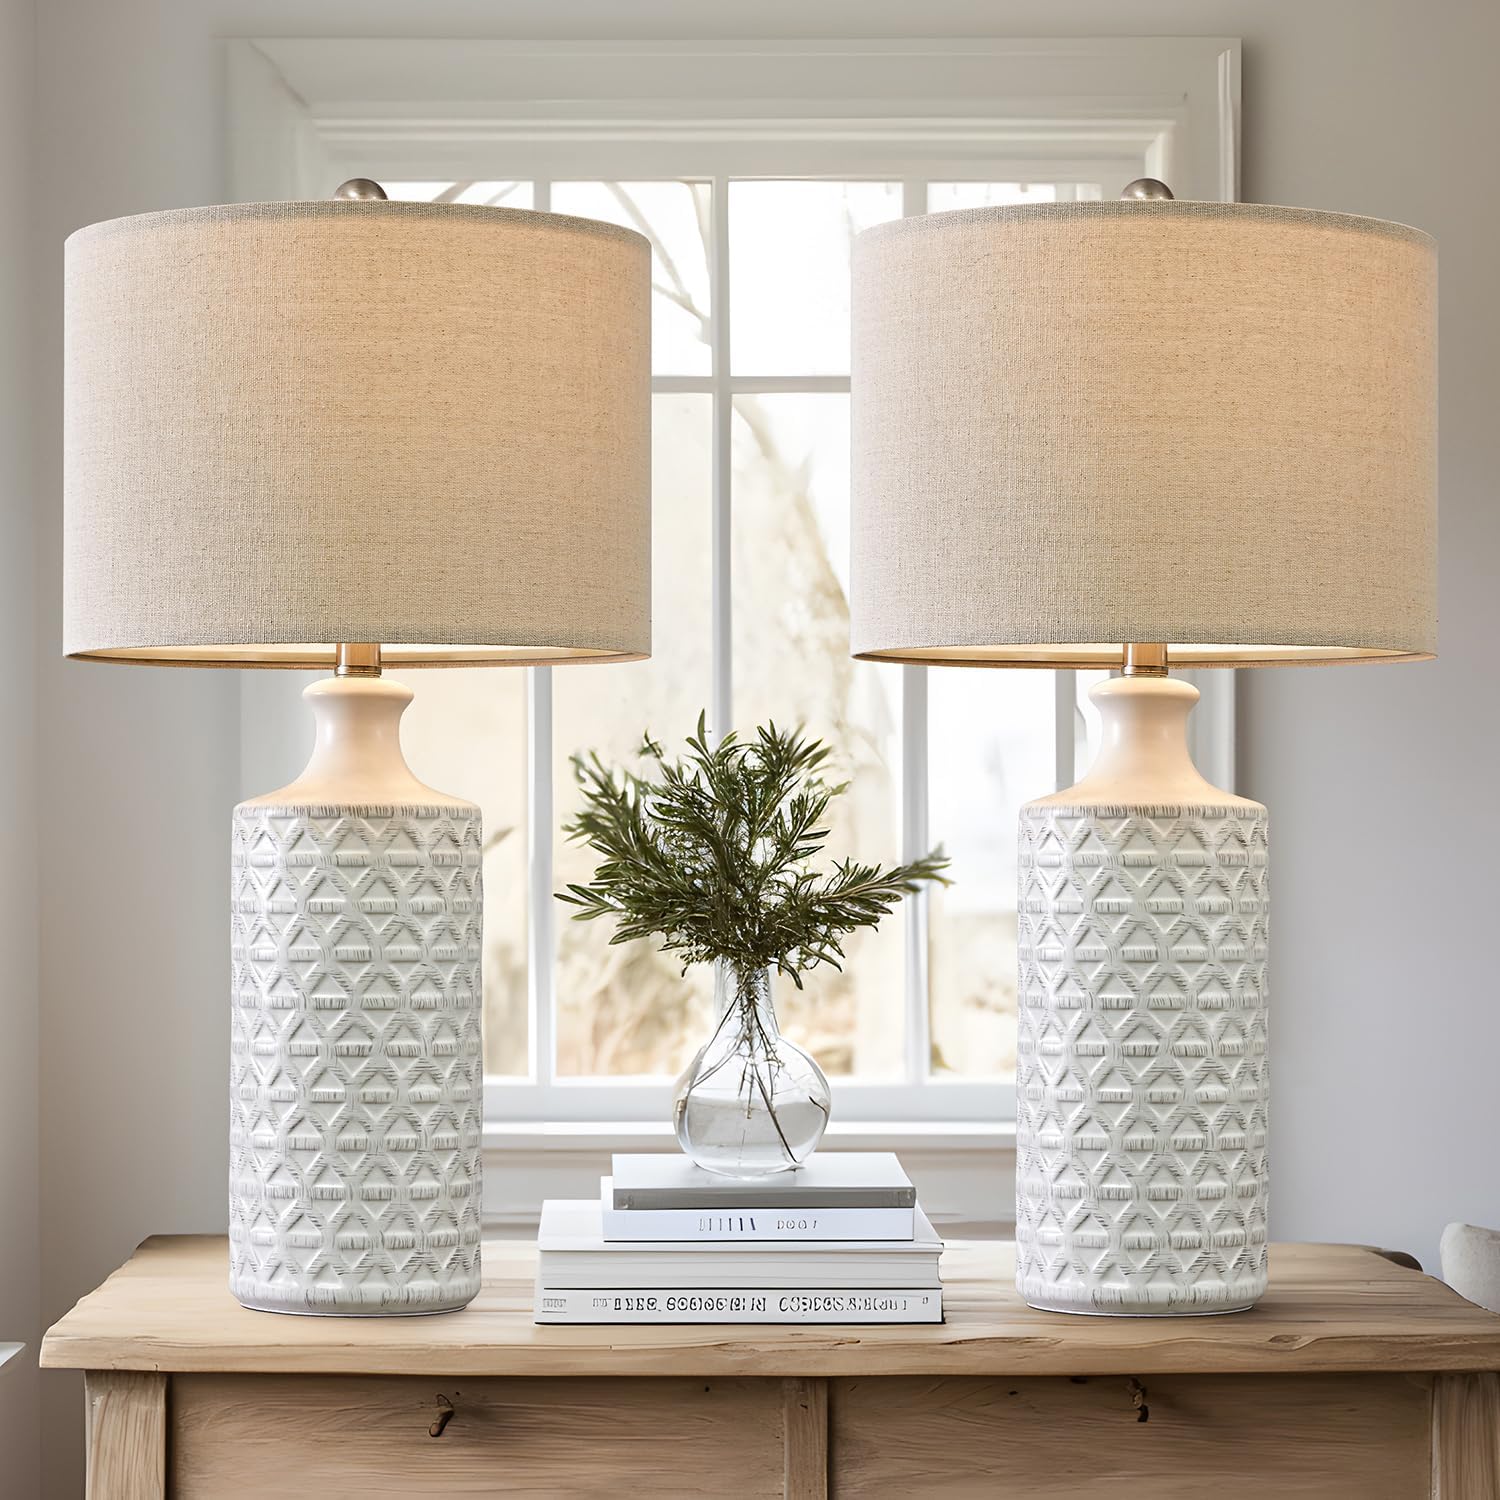 I am very pleased with this purchase. They were very easy to assemble. And look very pretty in my space. The lamps are an ivory color with a greige color on the diamonds.